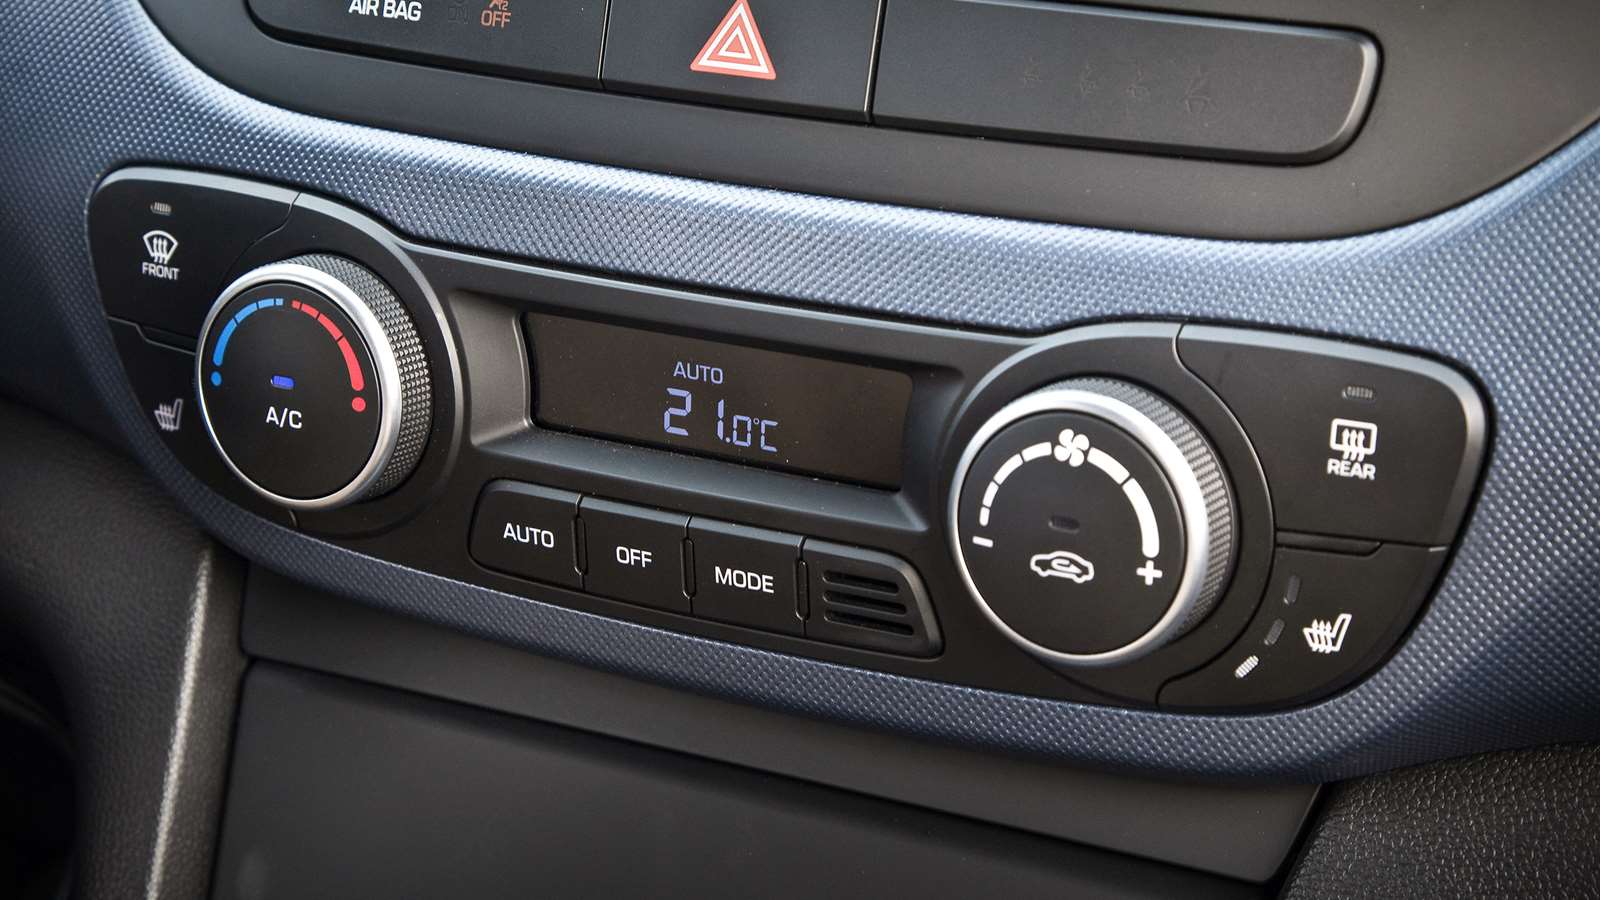 How in-car heating has evolved the last 100 years – Axon's Automotive  Anorak